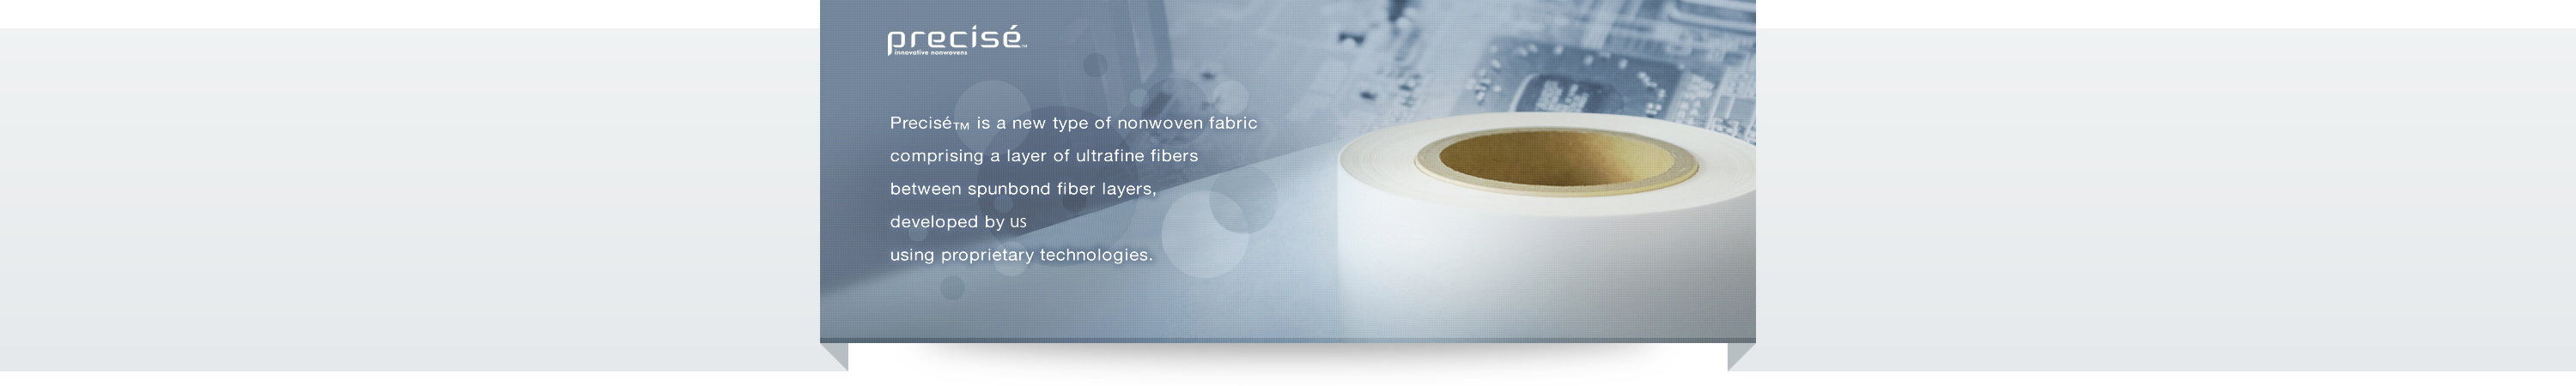 Precisé™ is a new type of nonwoven fabriccomprising a layer of ultrafine fibers between spunbond fiber layers, developed by us Corporationusing proprietary technologies.